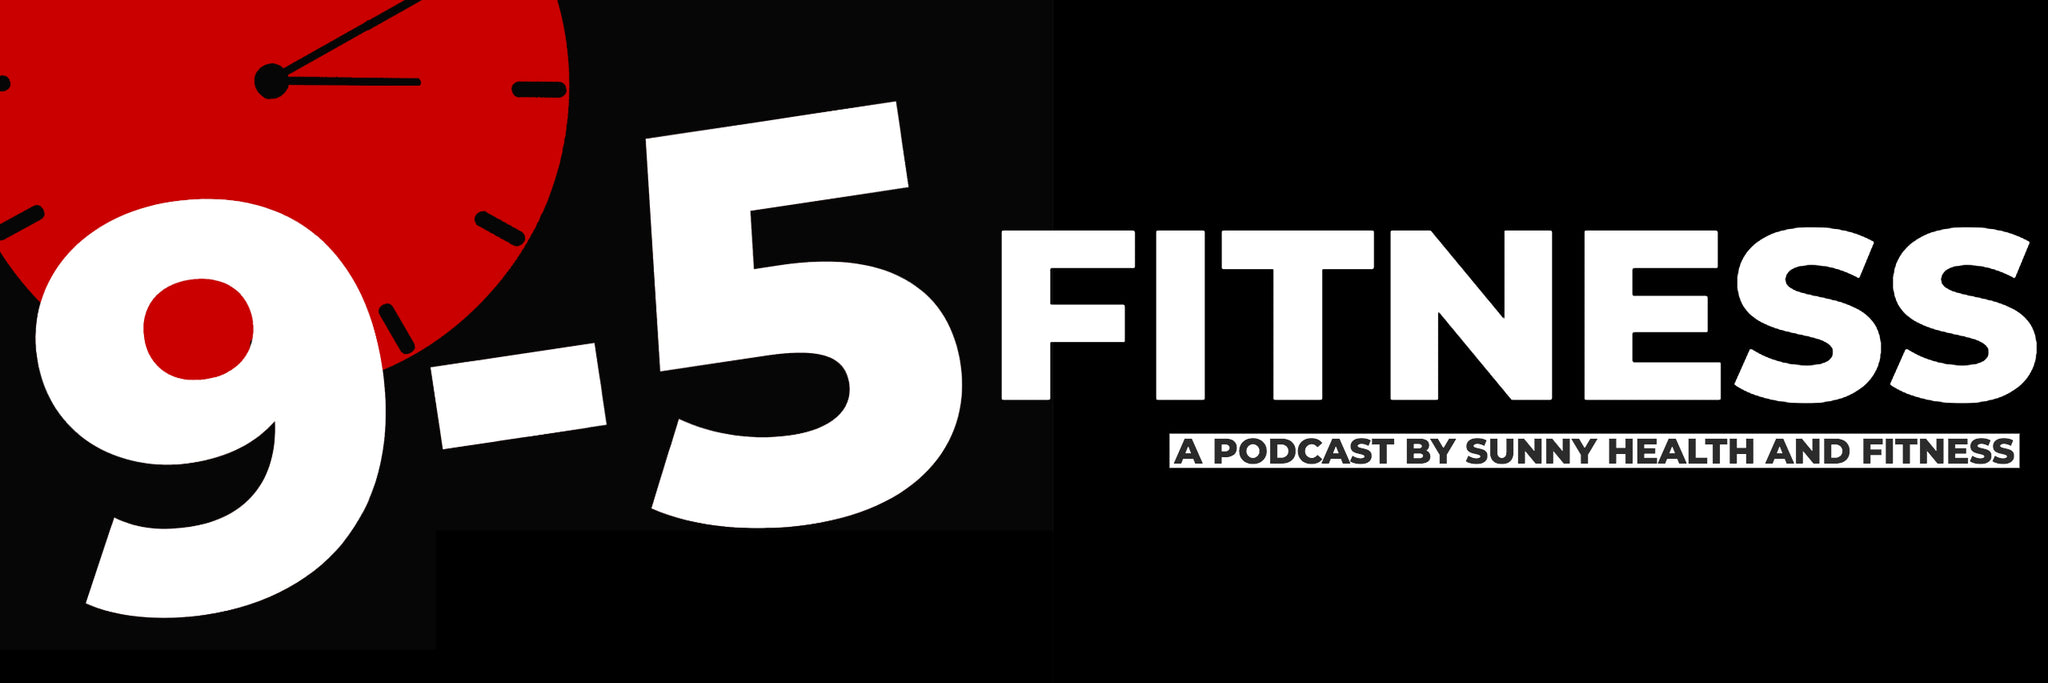 9 to 5 podcast banner with red clock icon in left upper corner